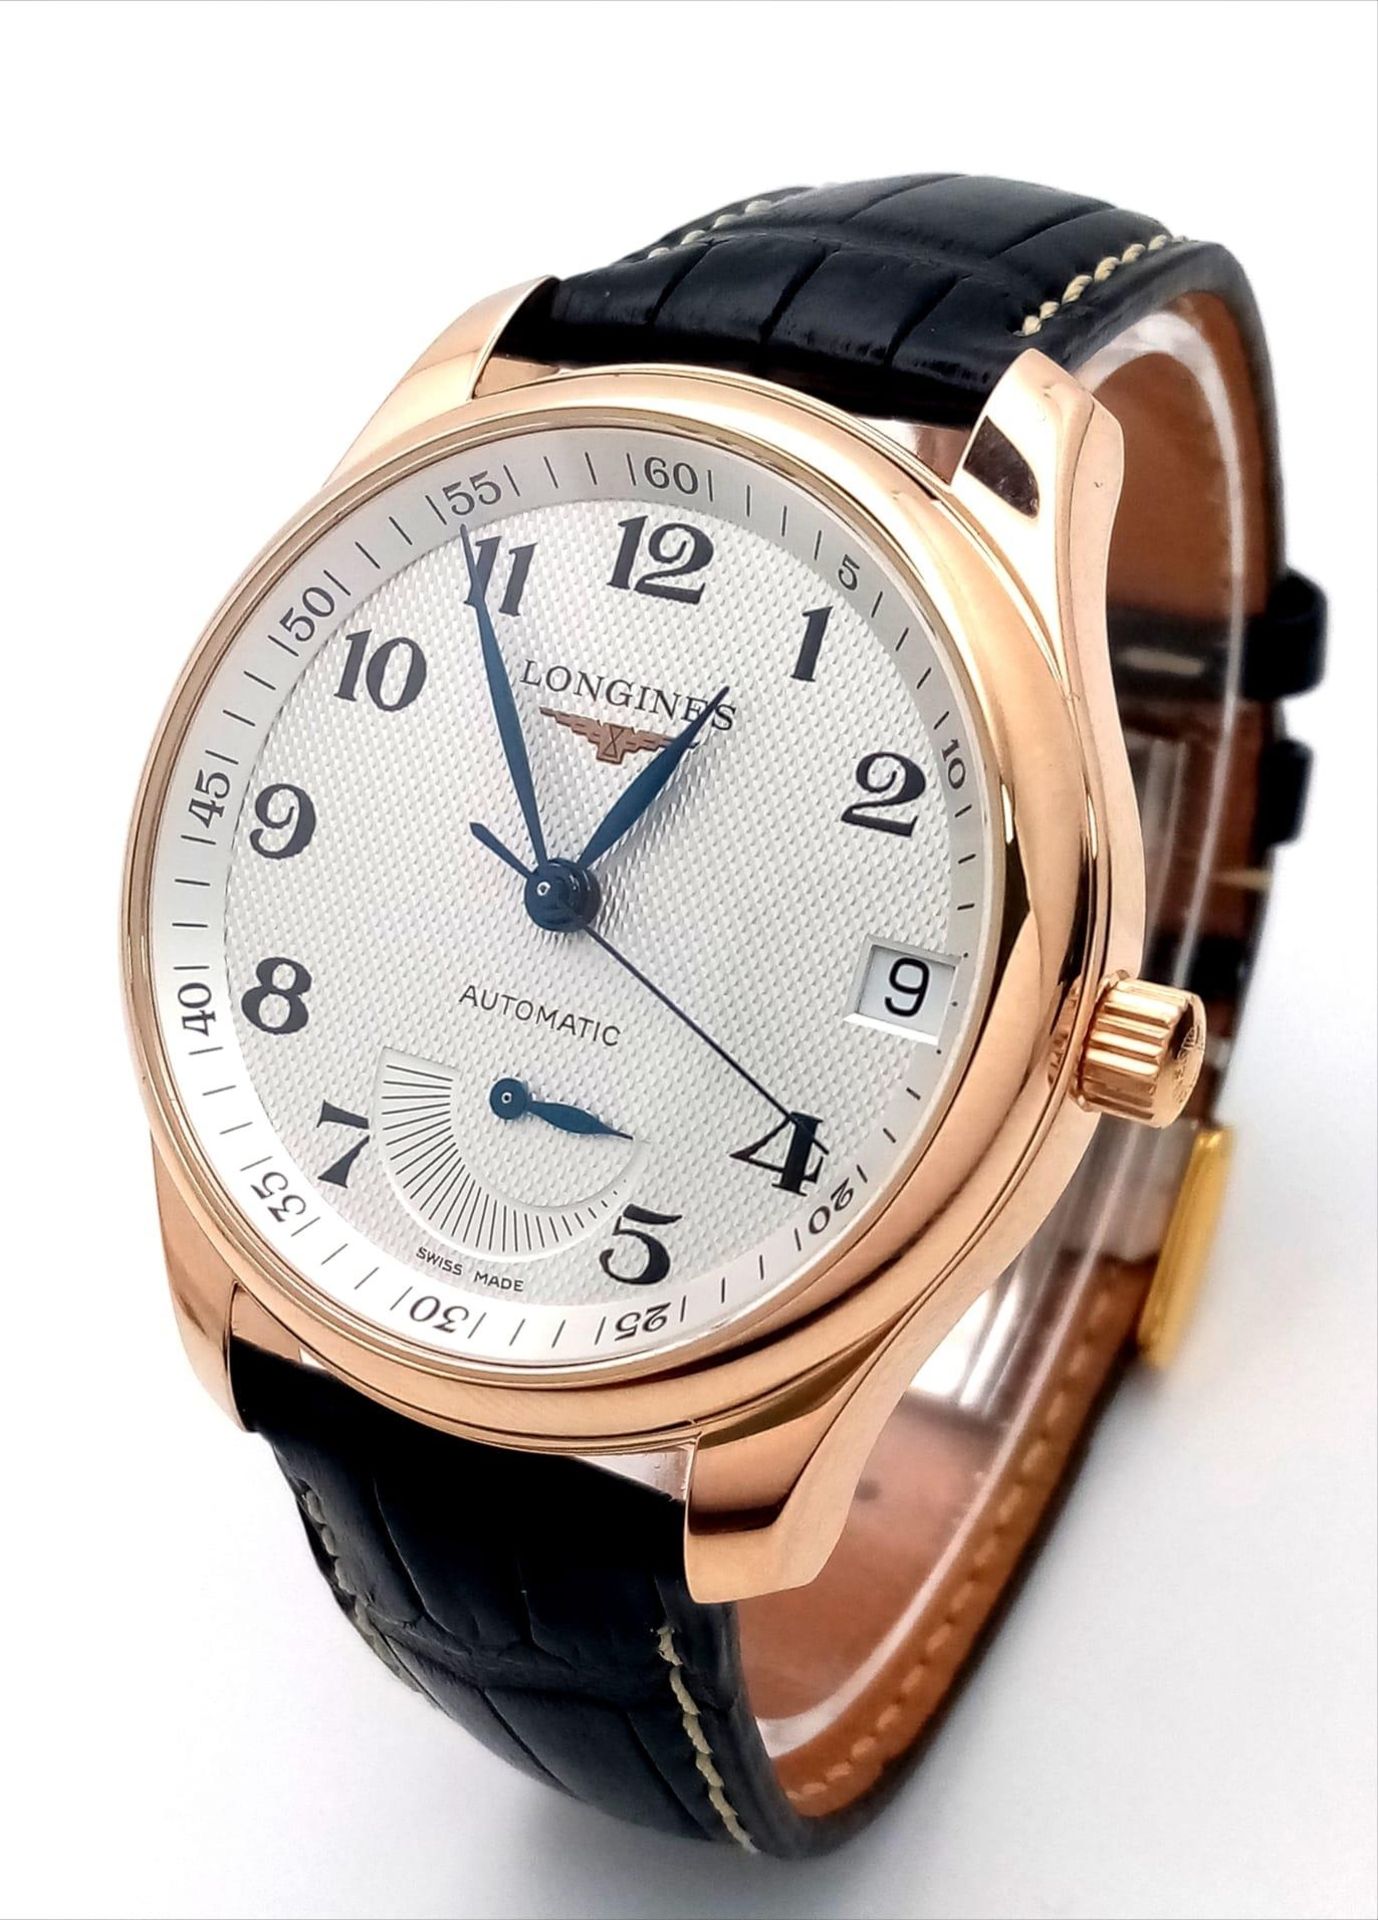 A Glorious Longine 18K Rose Gold Automatic Gents Watch. Black Alligator leather strap. 18K rose gold